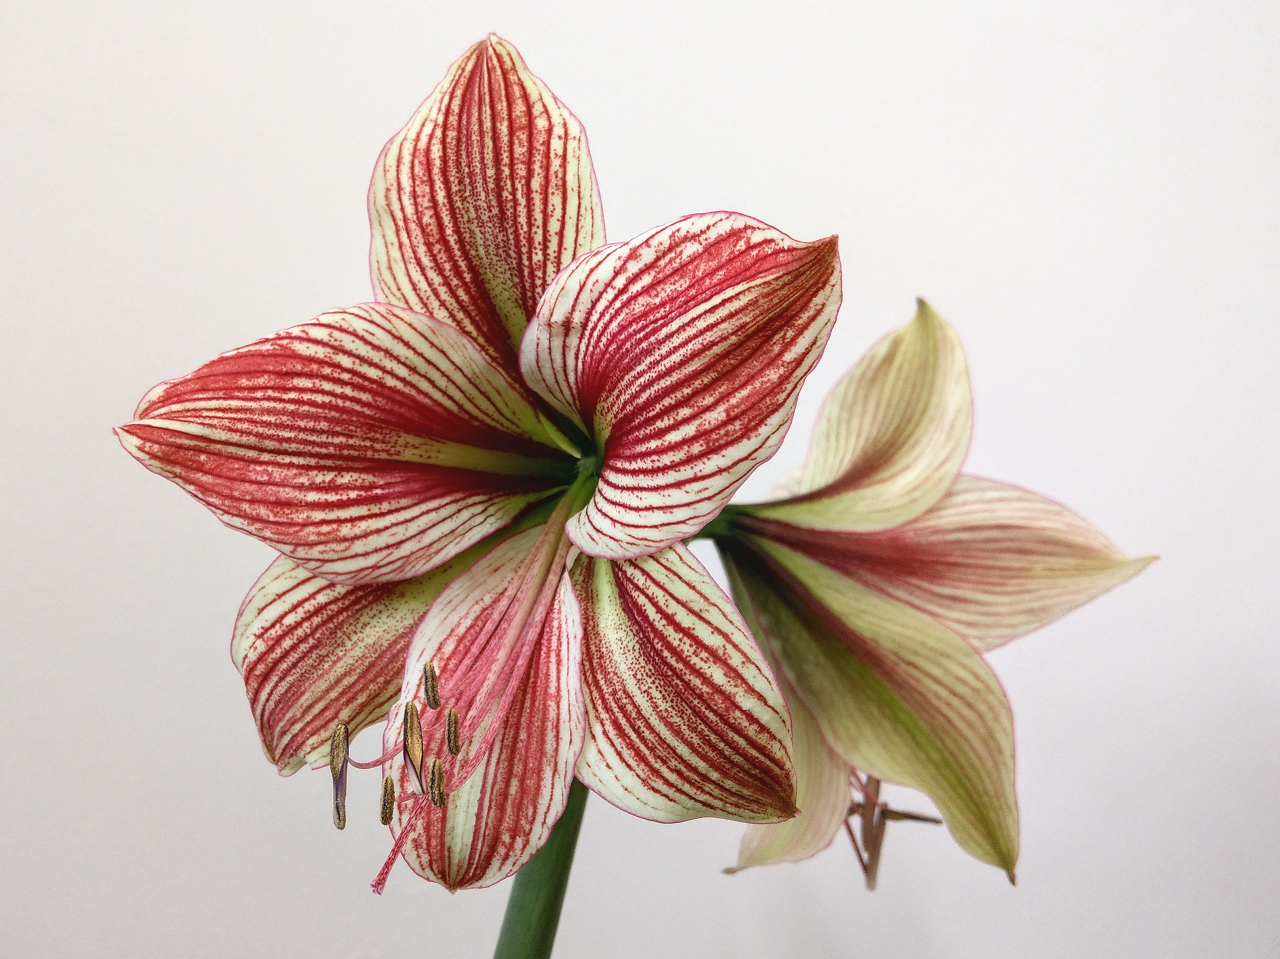 Image of a white and red amaryllis in bloom.